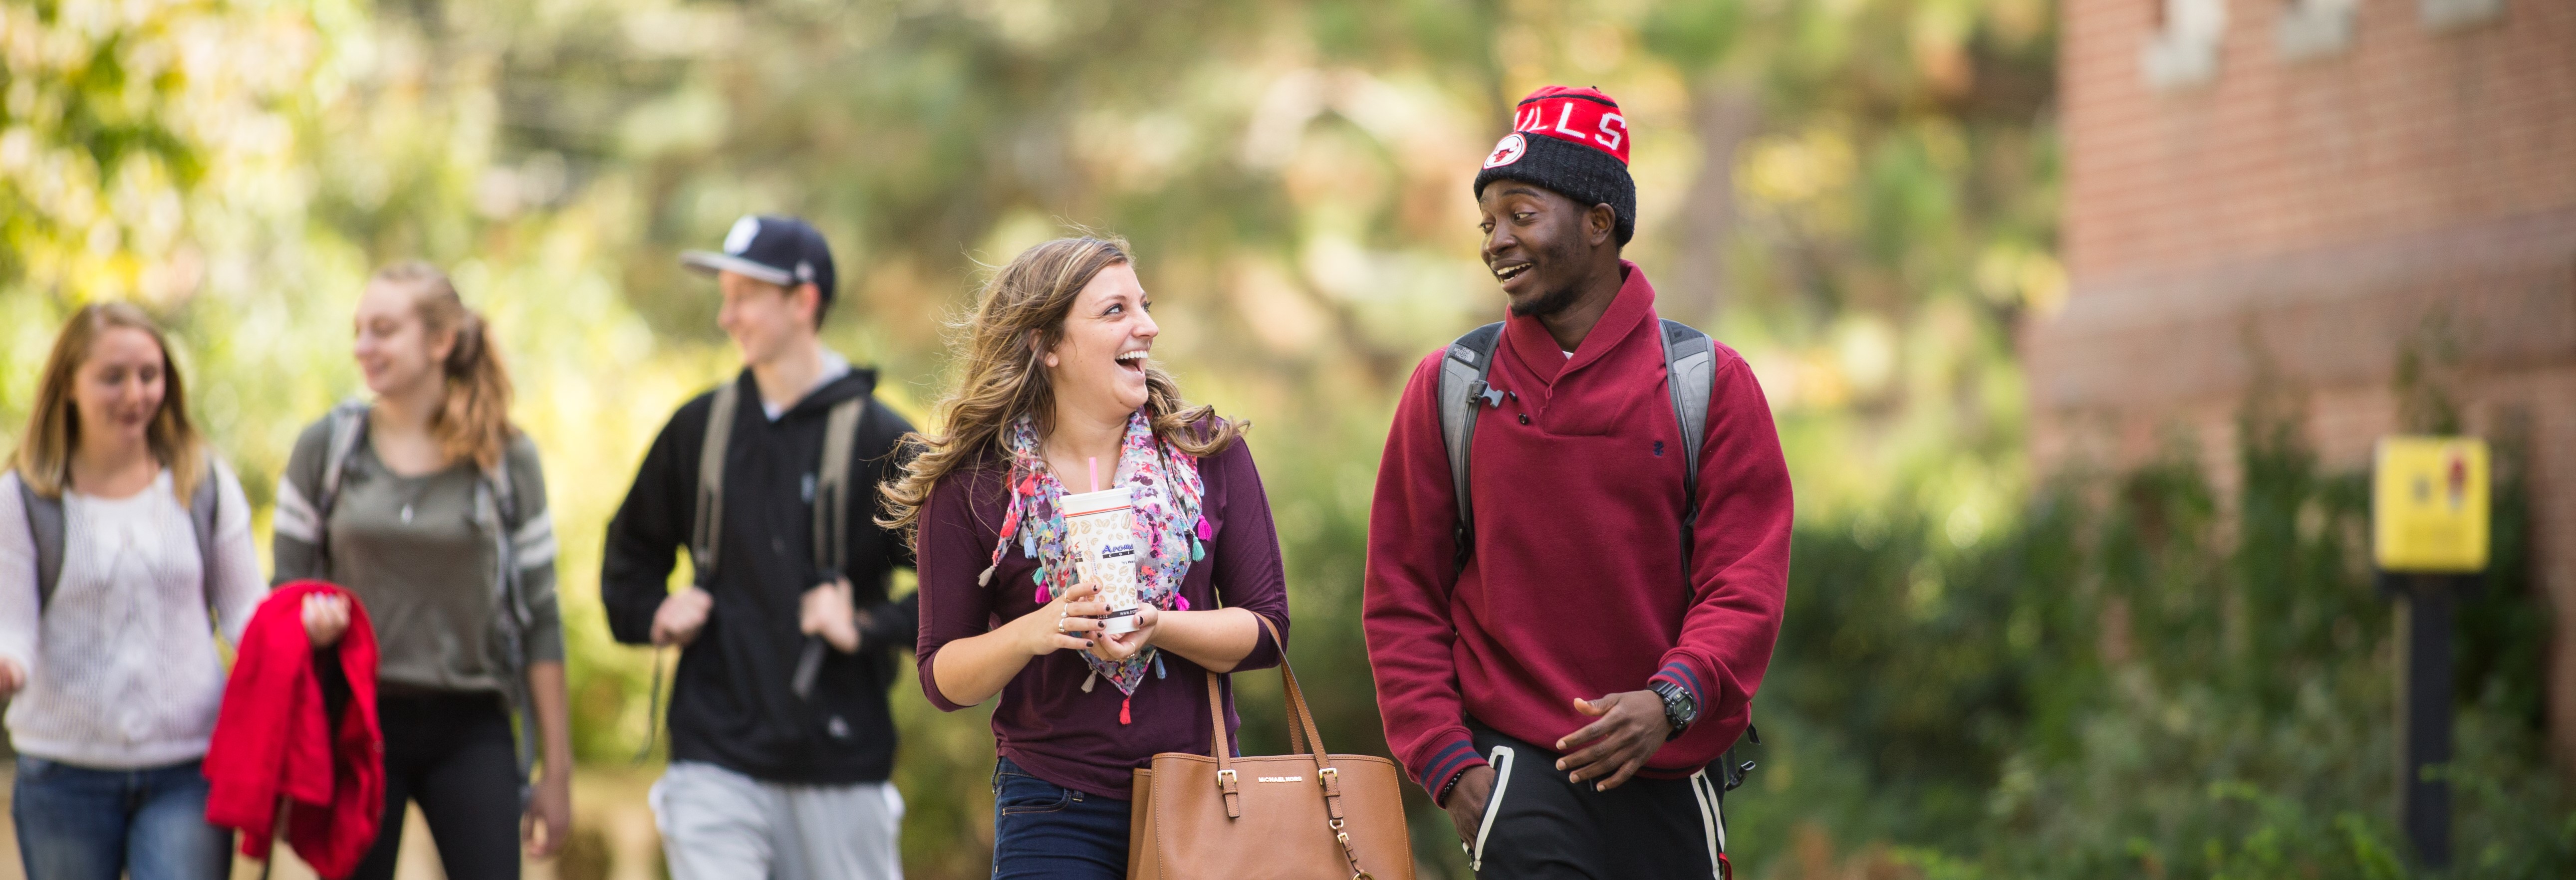 UNH students share a laugh walking to class